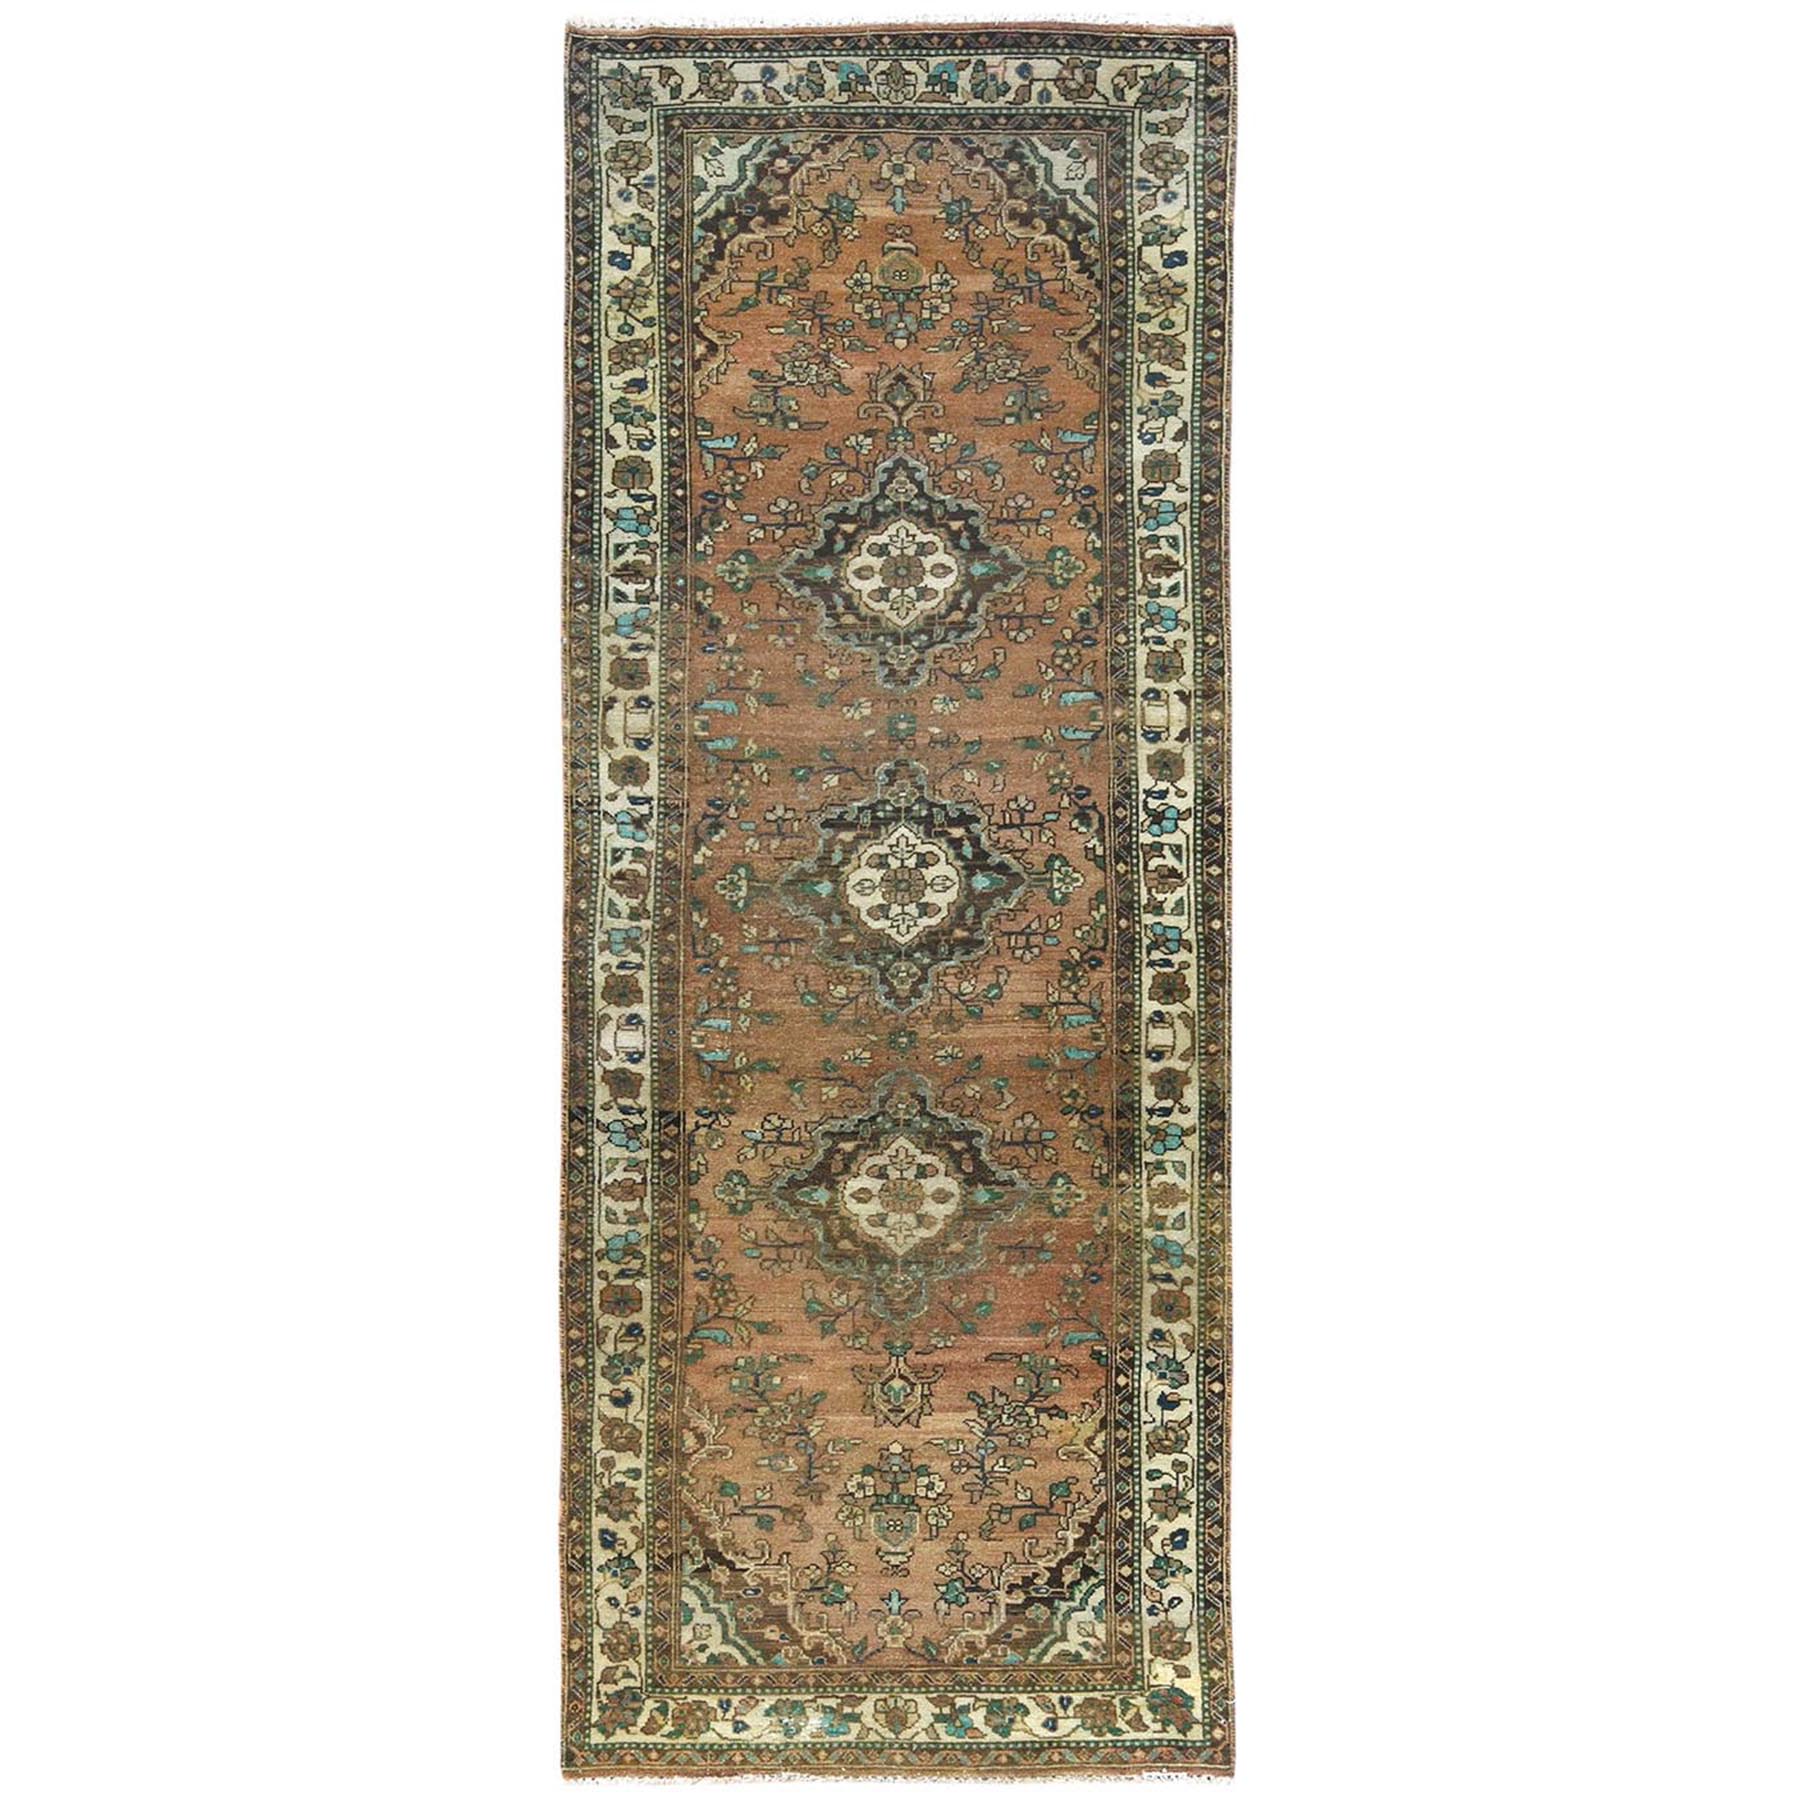 3'3"x9'8" Honey Brown with Touches of Green, Vintage Persian Hamadan, Hand Woven, Pure Wool, Distressed Look, Worn Down Wide Runner Oriental Rug 